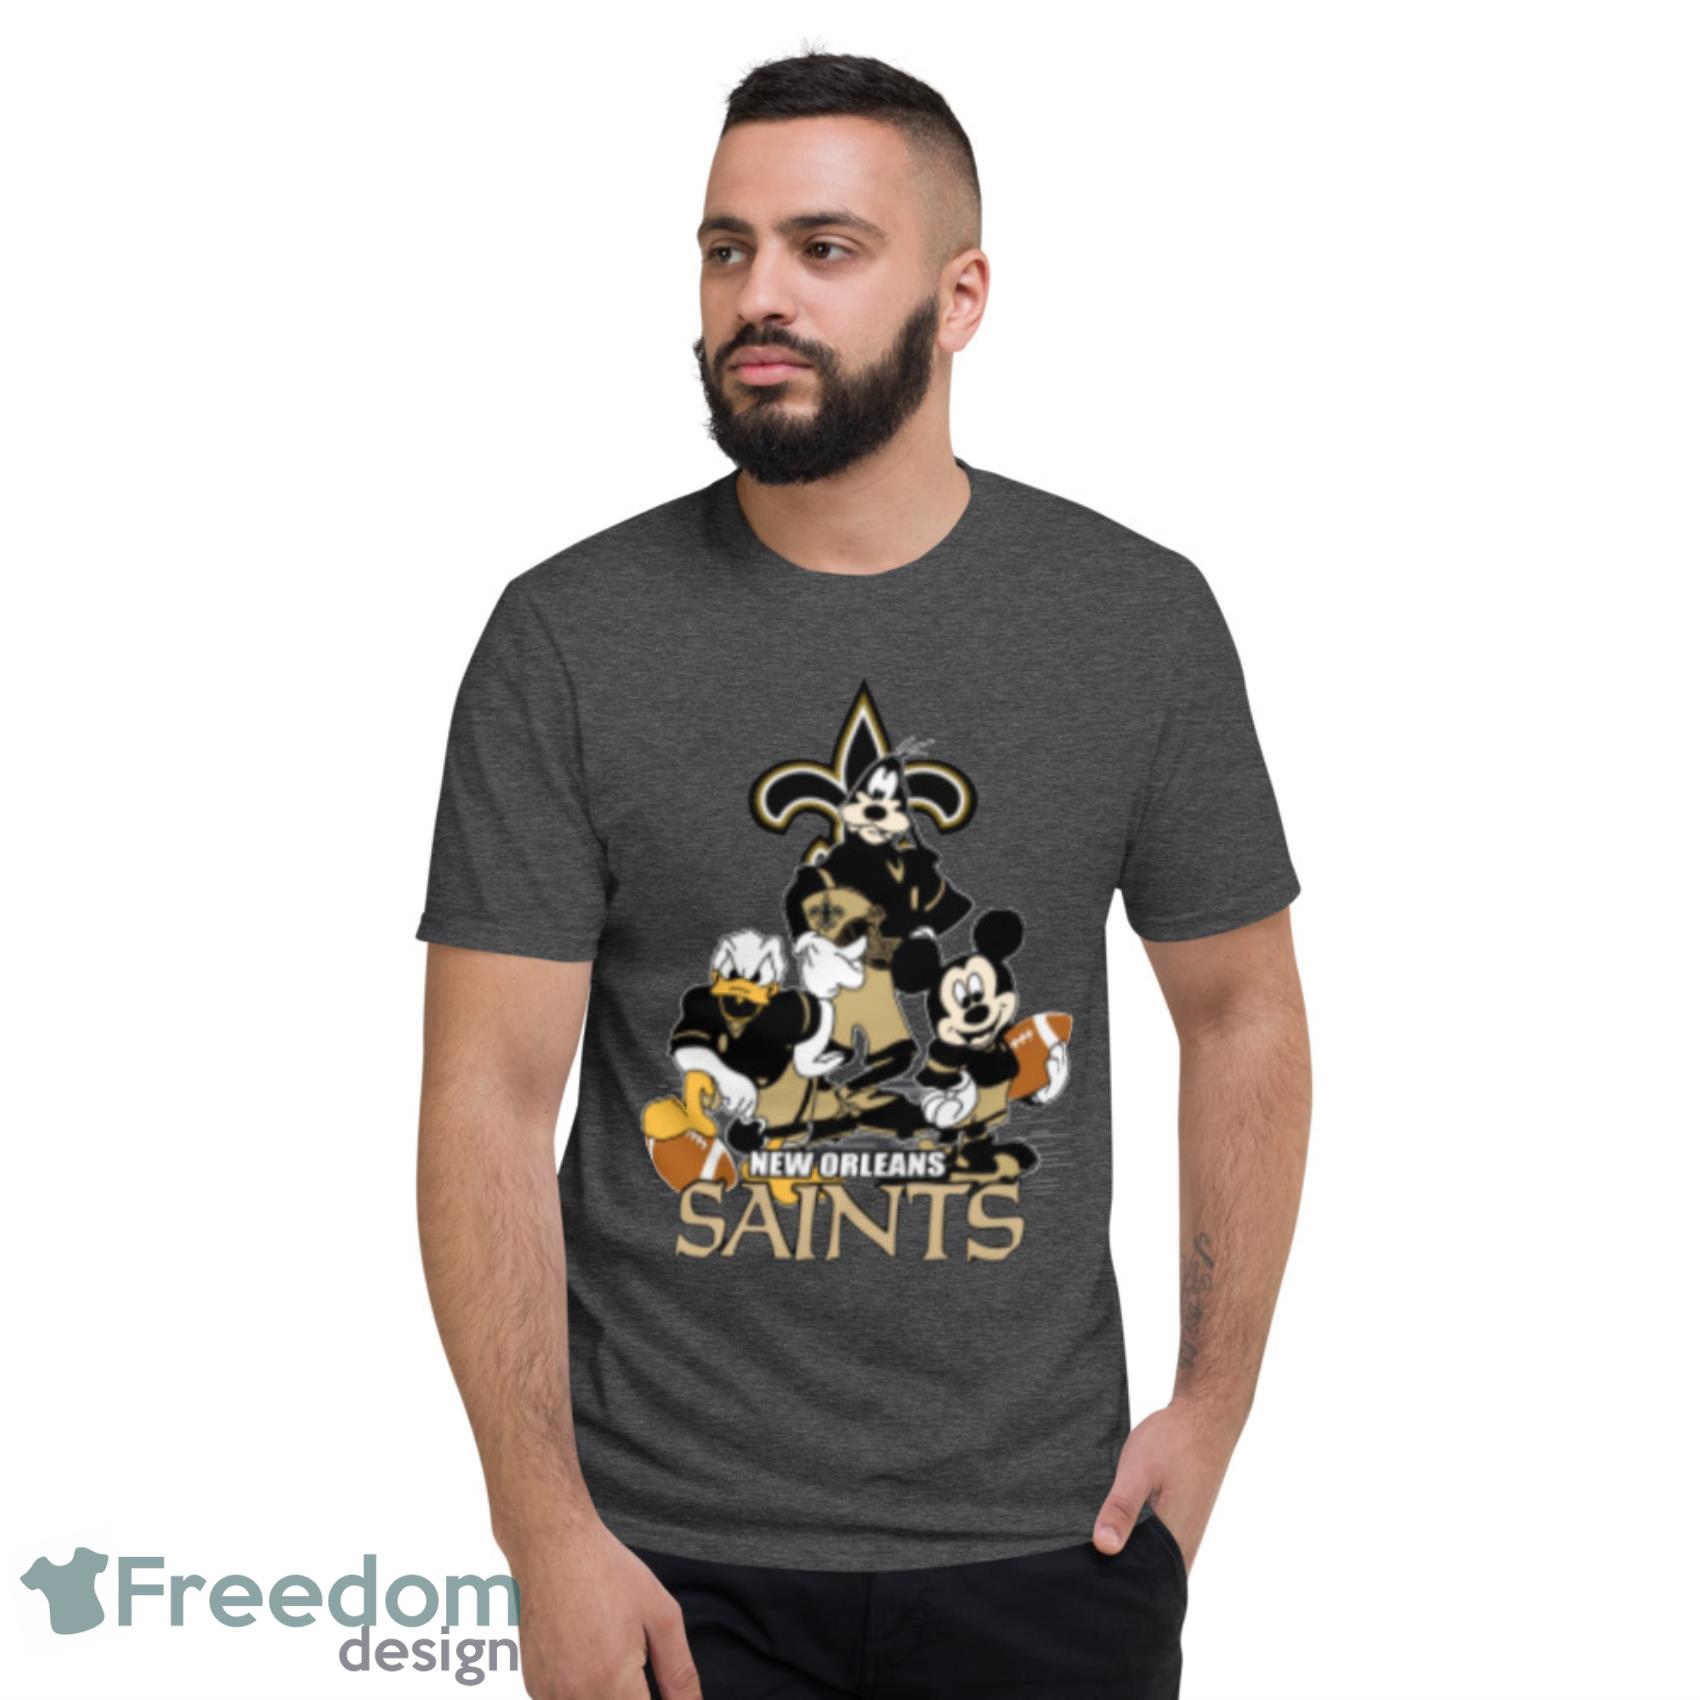 NFL, Shirts & Tops, New Orleans Saints Youth Size 4t Shirt